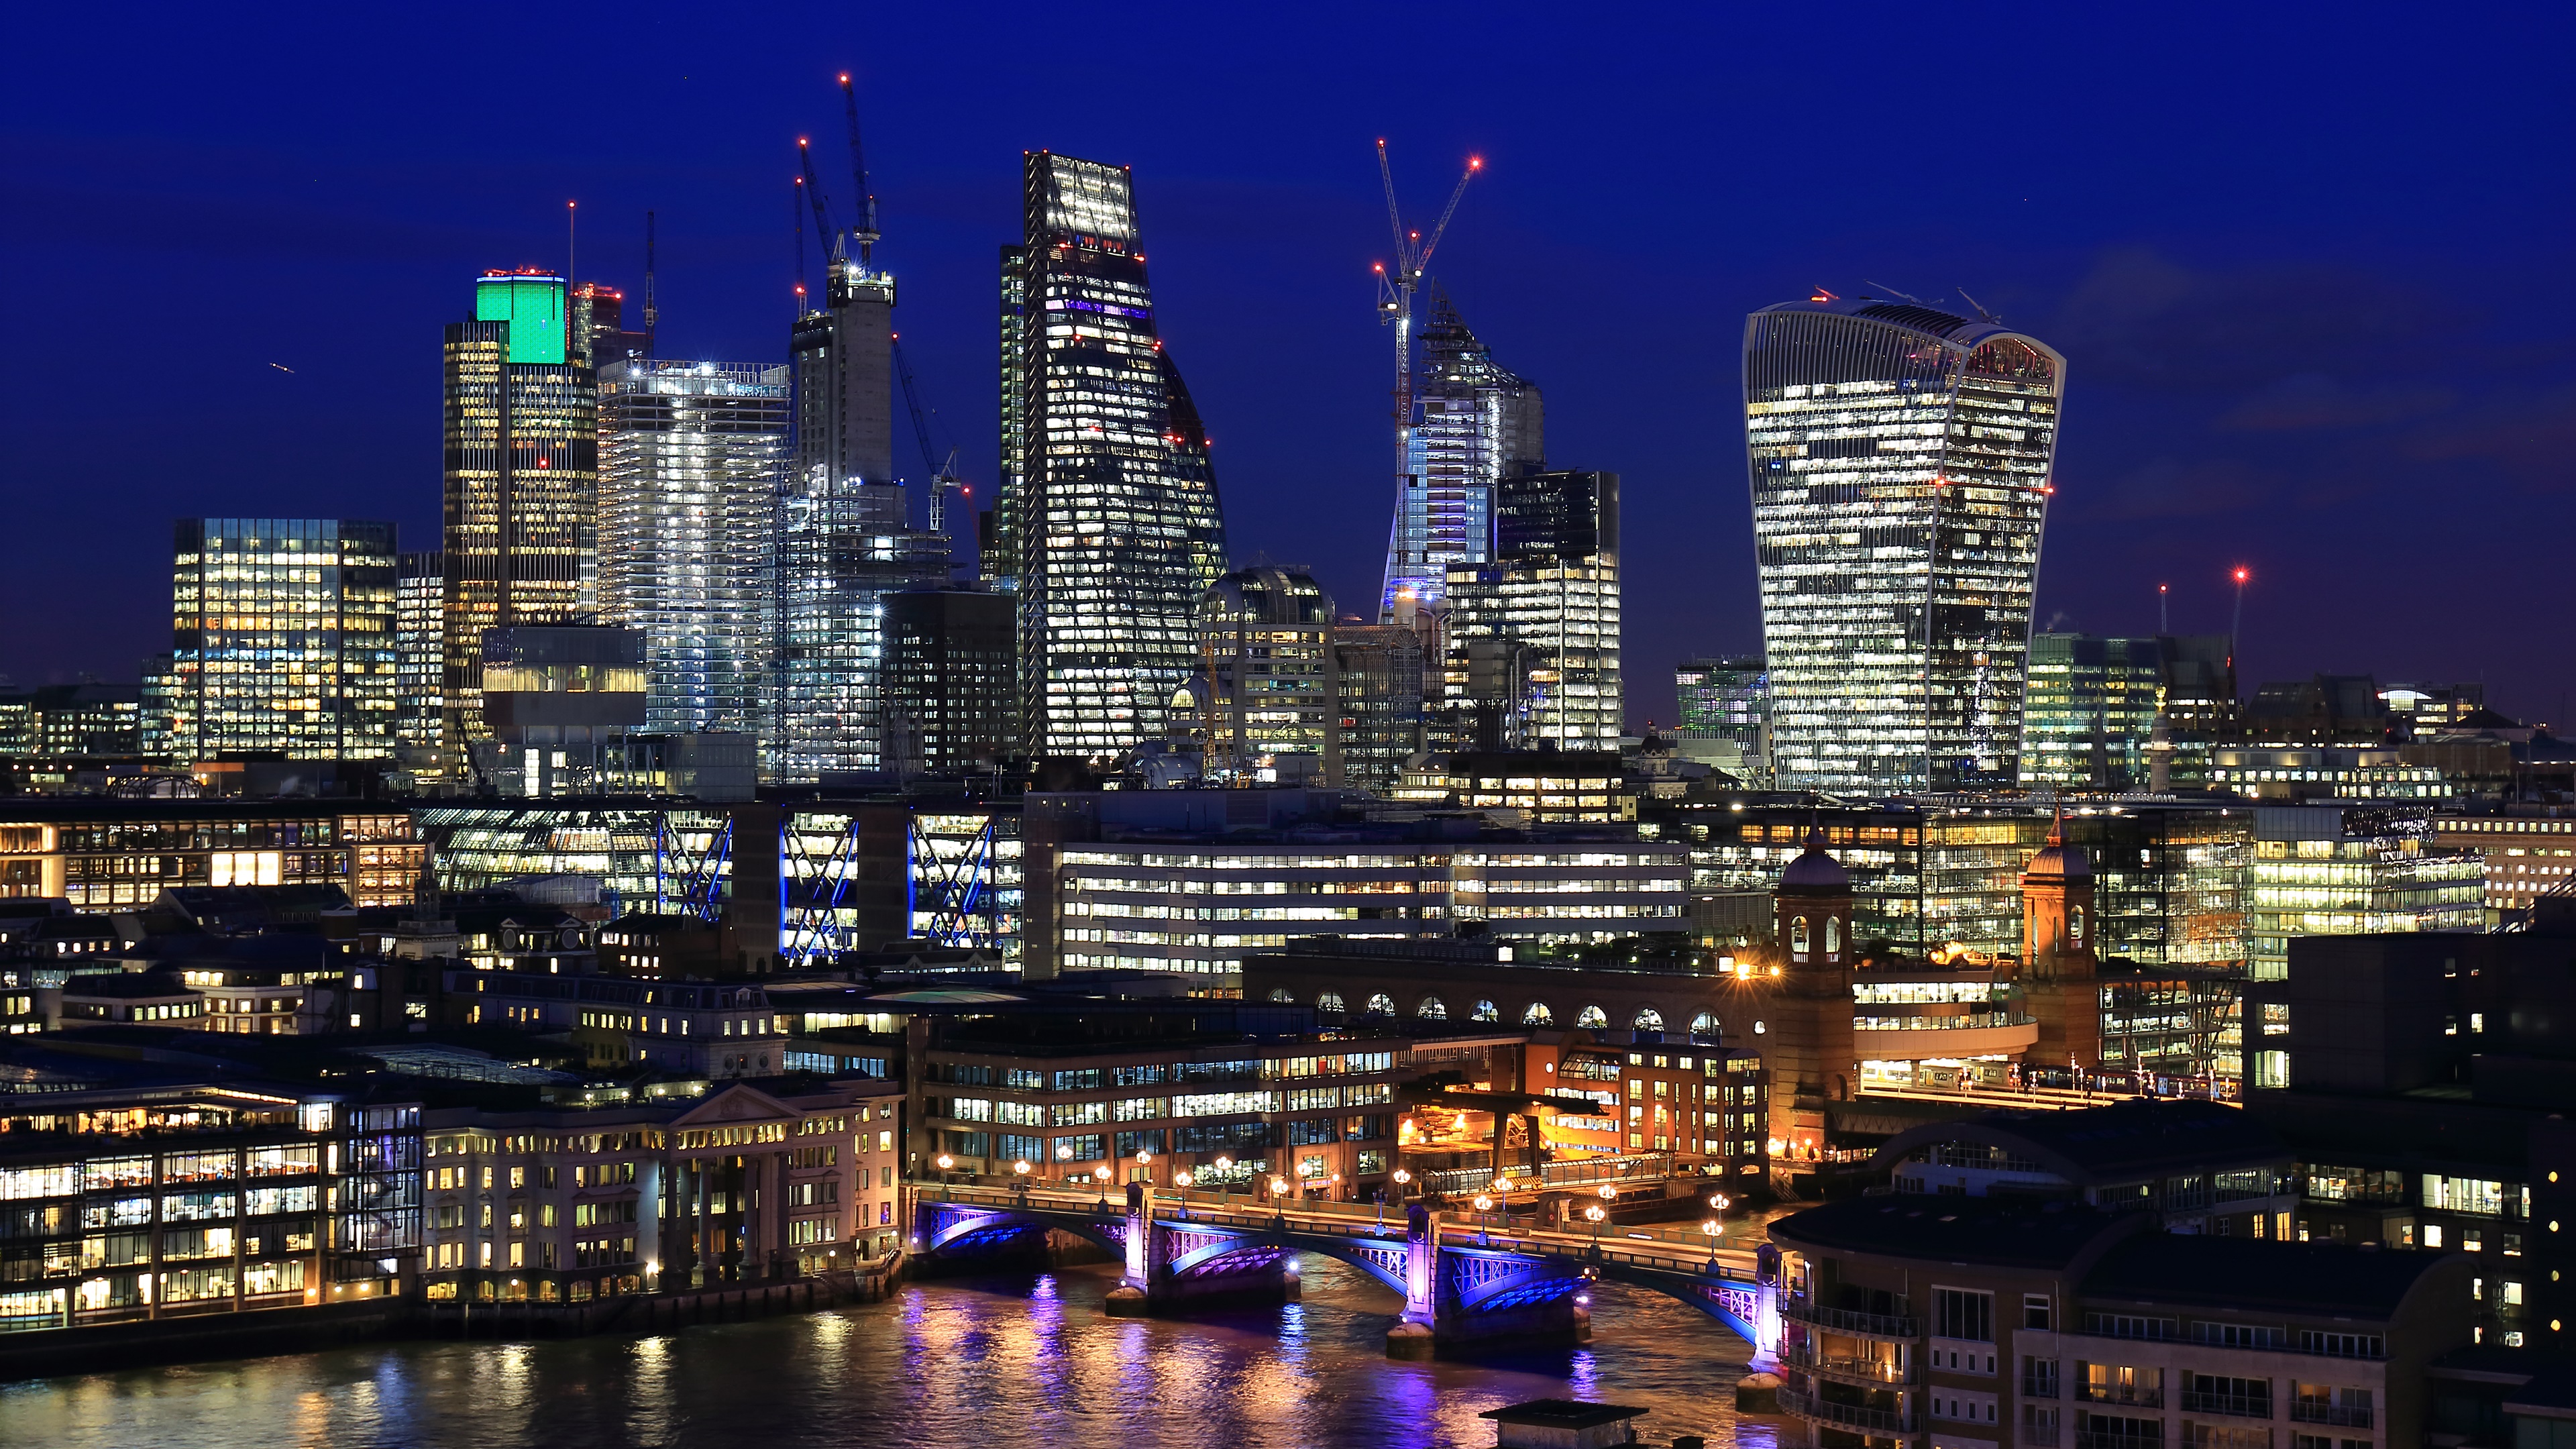 London's financial district at night wallpaper - backiee